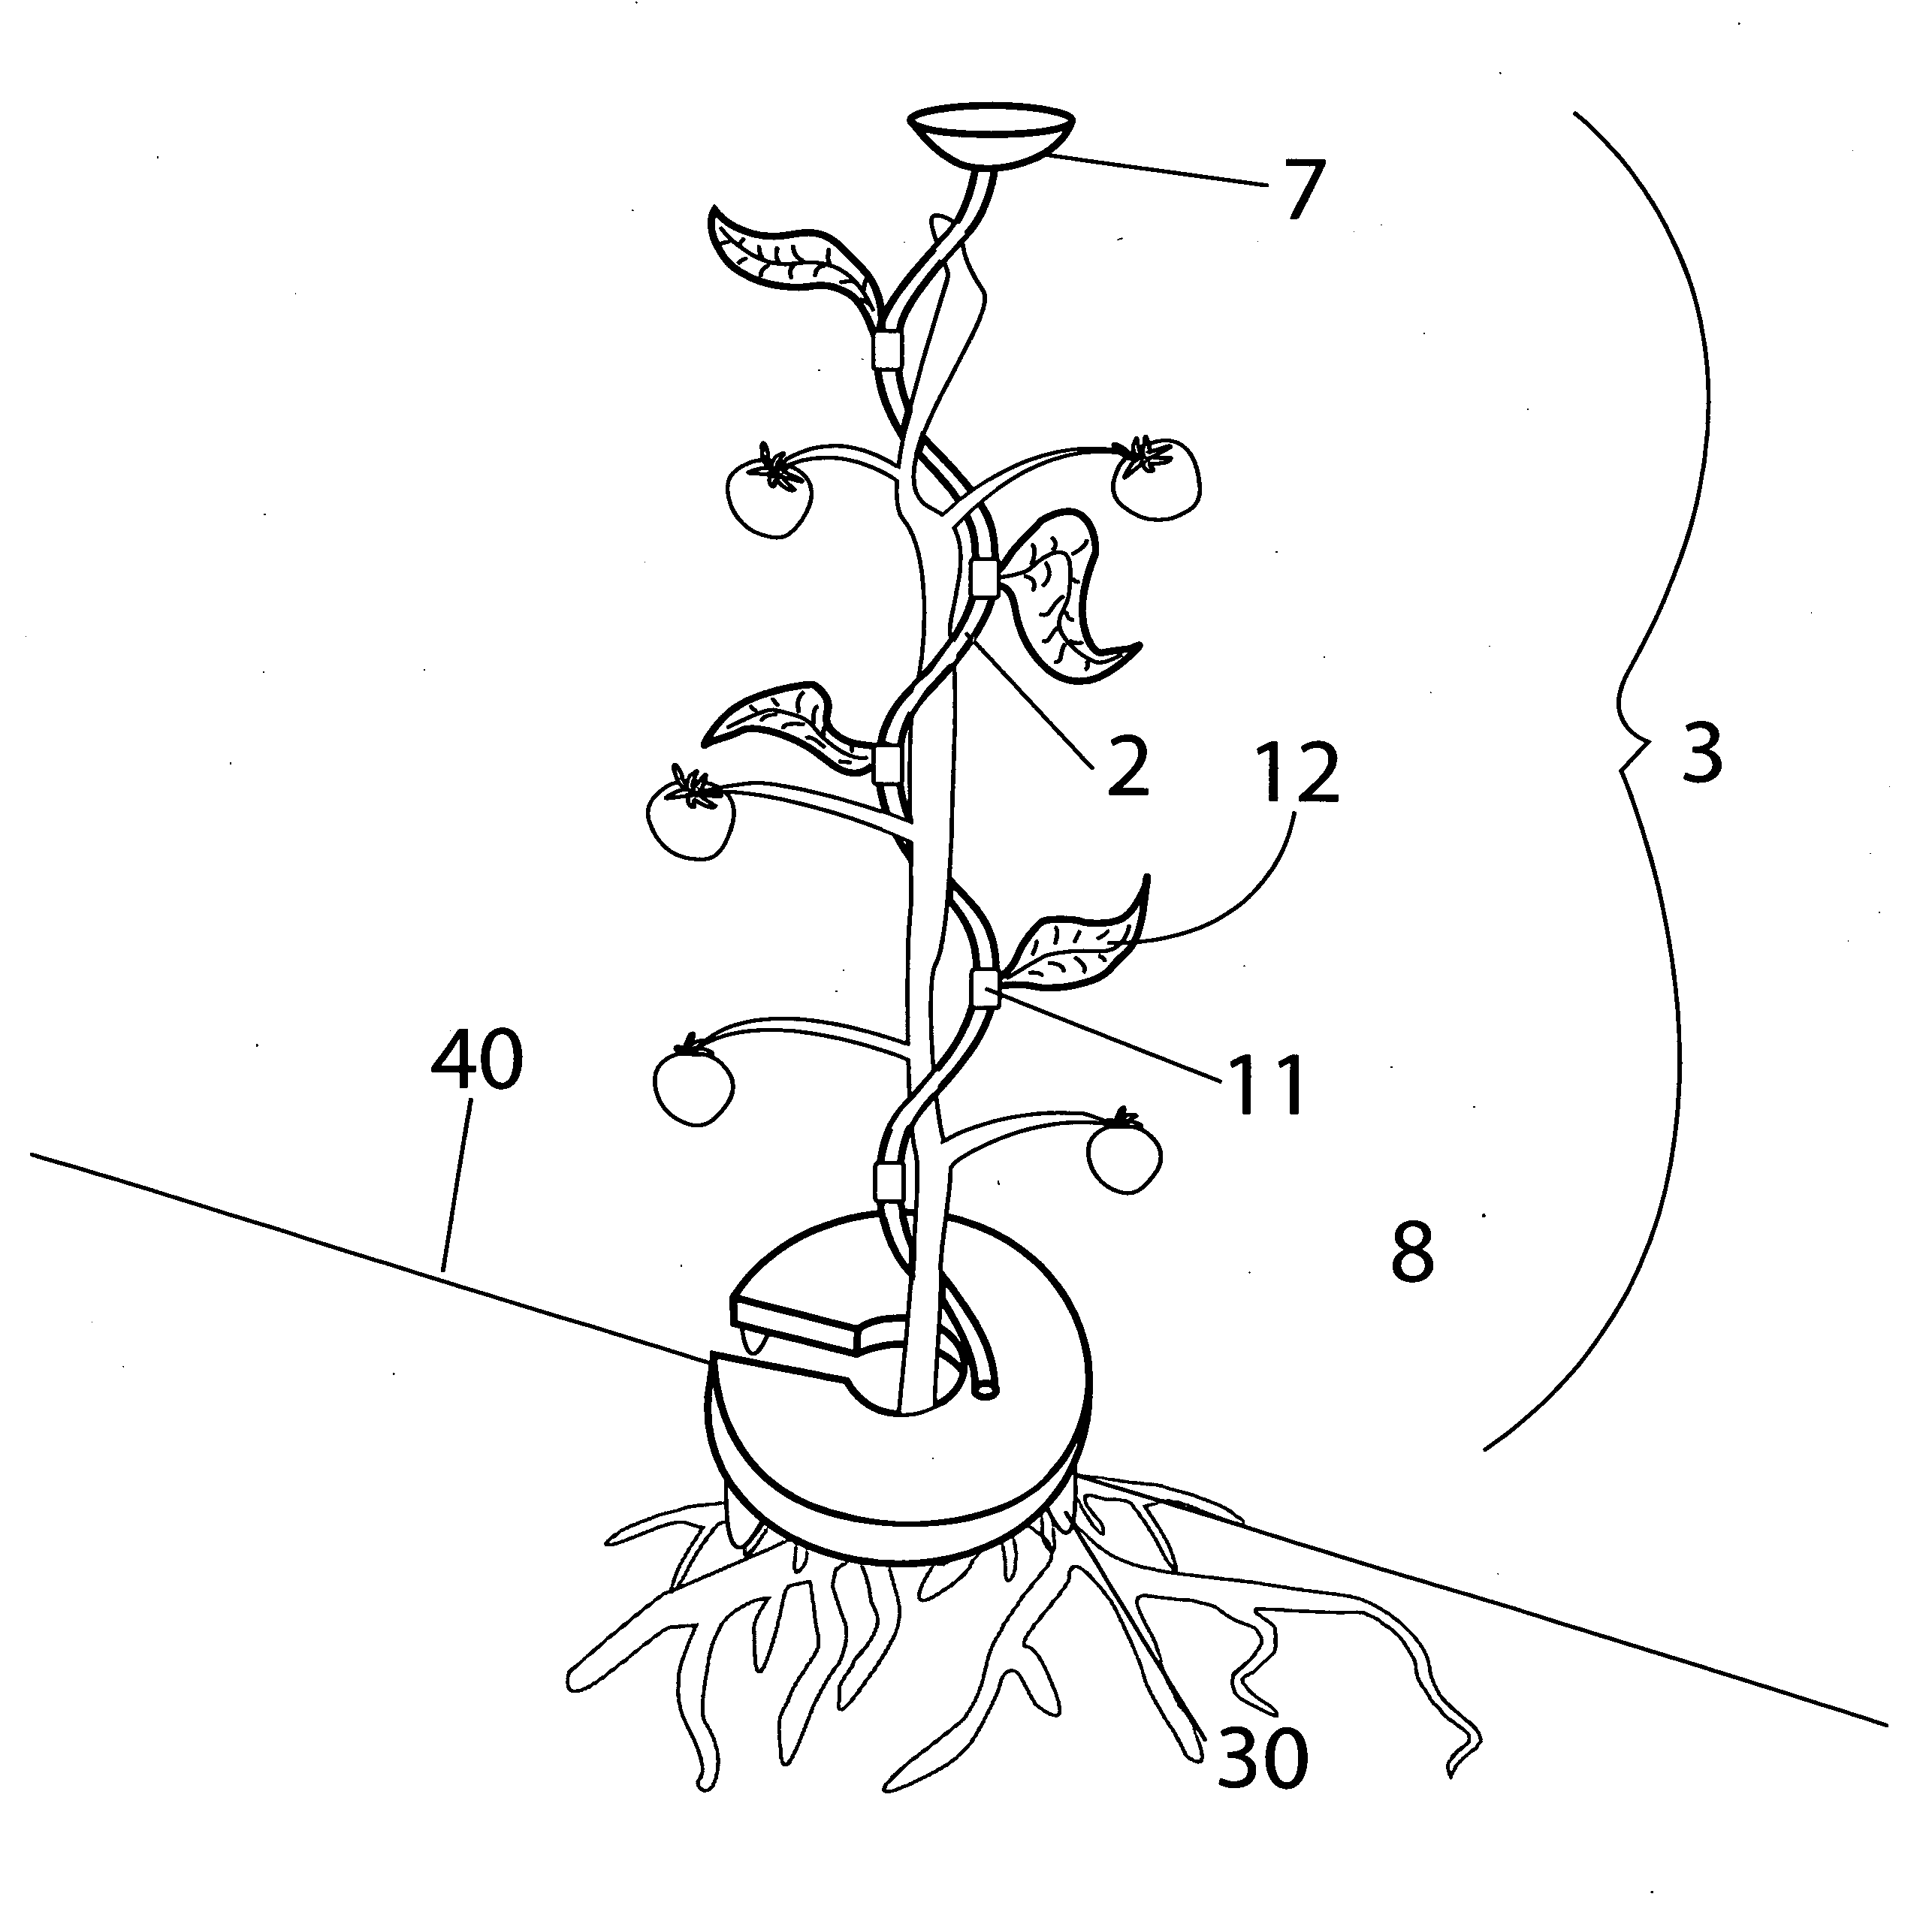 Plant support and water displacement apparatus